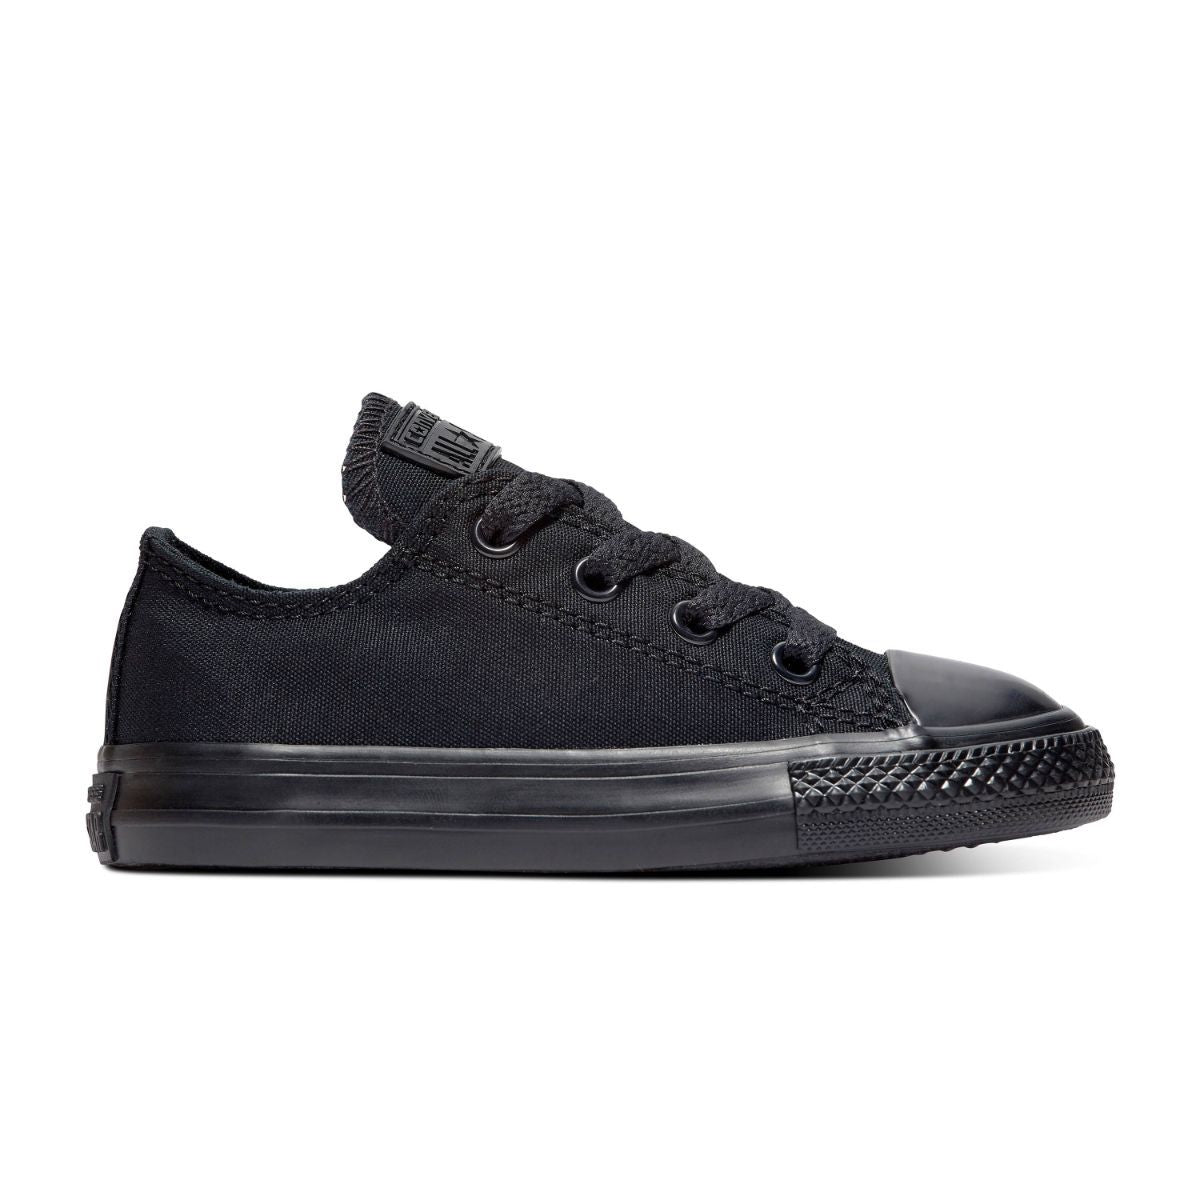 Toddler Chuck Taylor All Star Black Low Top